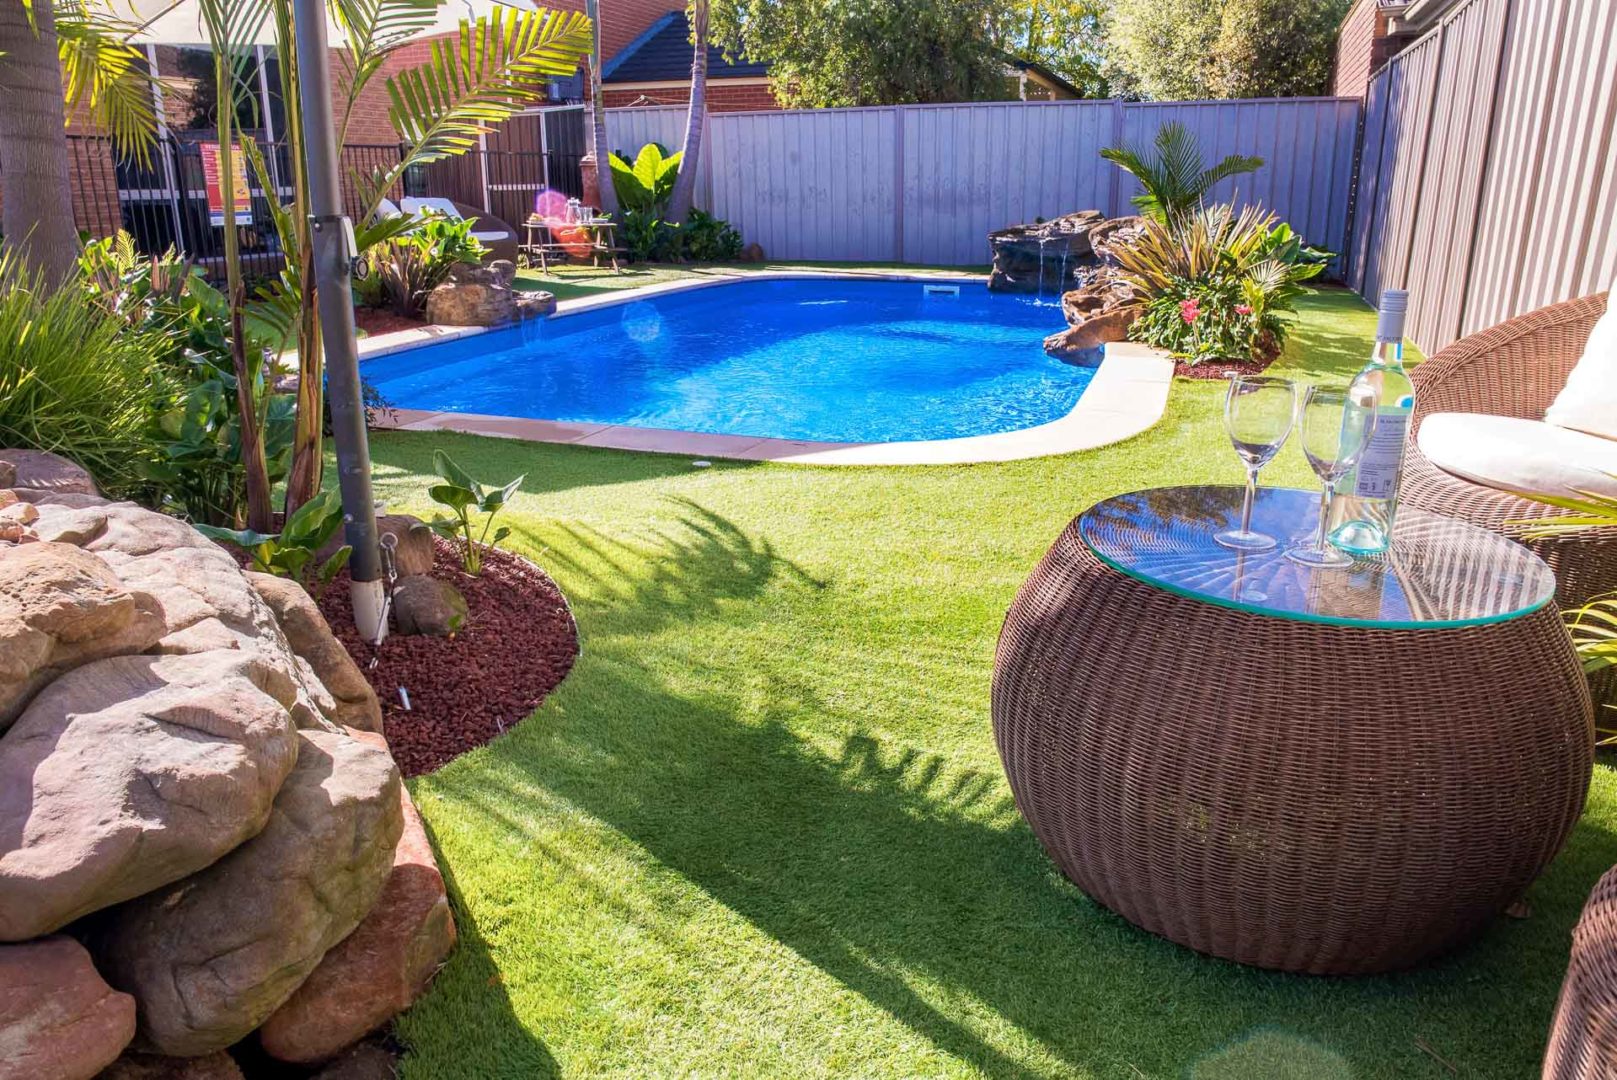 Fibreglass Pool Adelaide - Looking for a fibreglass pool installation for your home? Get a free measure and quote in Adelaide.